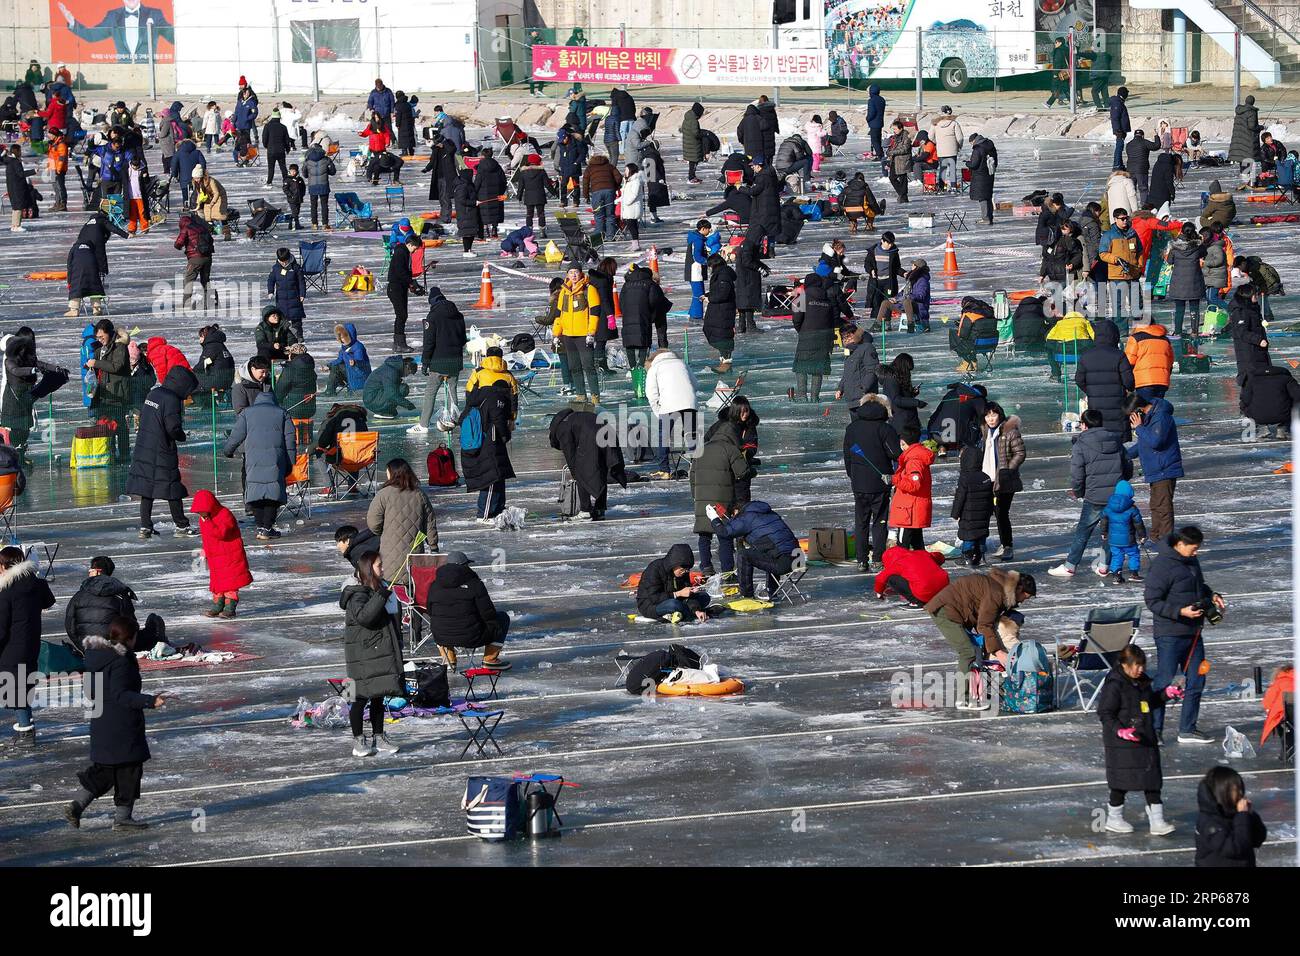 (190105) -- HWACHEON, Jan. 5, 2019 -- People fish for trouts on a frozen river during the Sancheoneo Ice Festival in Hwacheon, South Korea, Jan. 5, 2019. As one of the biggest winter events in South Korea, the annual three-week festival draws people to the frozen Hwacheon river, where organizers drill fishing holes in the ice and release trouts into the river during the festival period. This year the festival lasts from Jan. 5 to Jan. 27. ) SOUTH KOREA-HWACHEON-SANCHEONEO ICE FESTIVAL WangxJingqiang PUBLICATIONxNOTxINxCHN Stock Photo